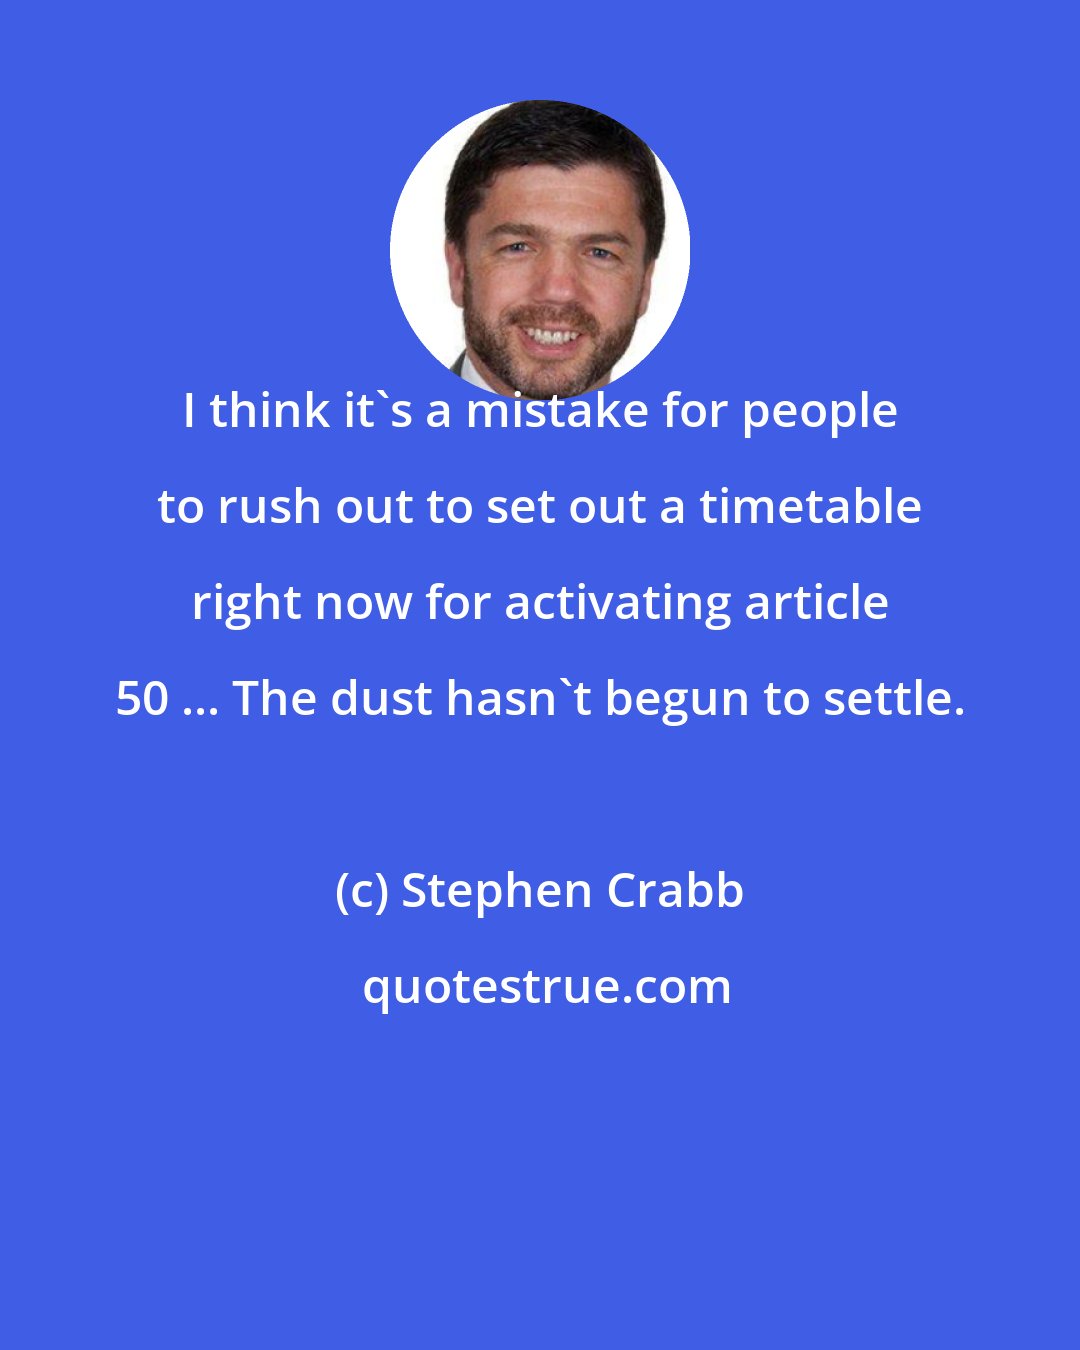 Stephen Crabb: I think it's a mistake for people to rush out to set out a timetable right now for activating article 50 ... The dust hasn't begun to settle.